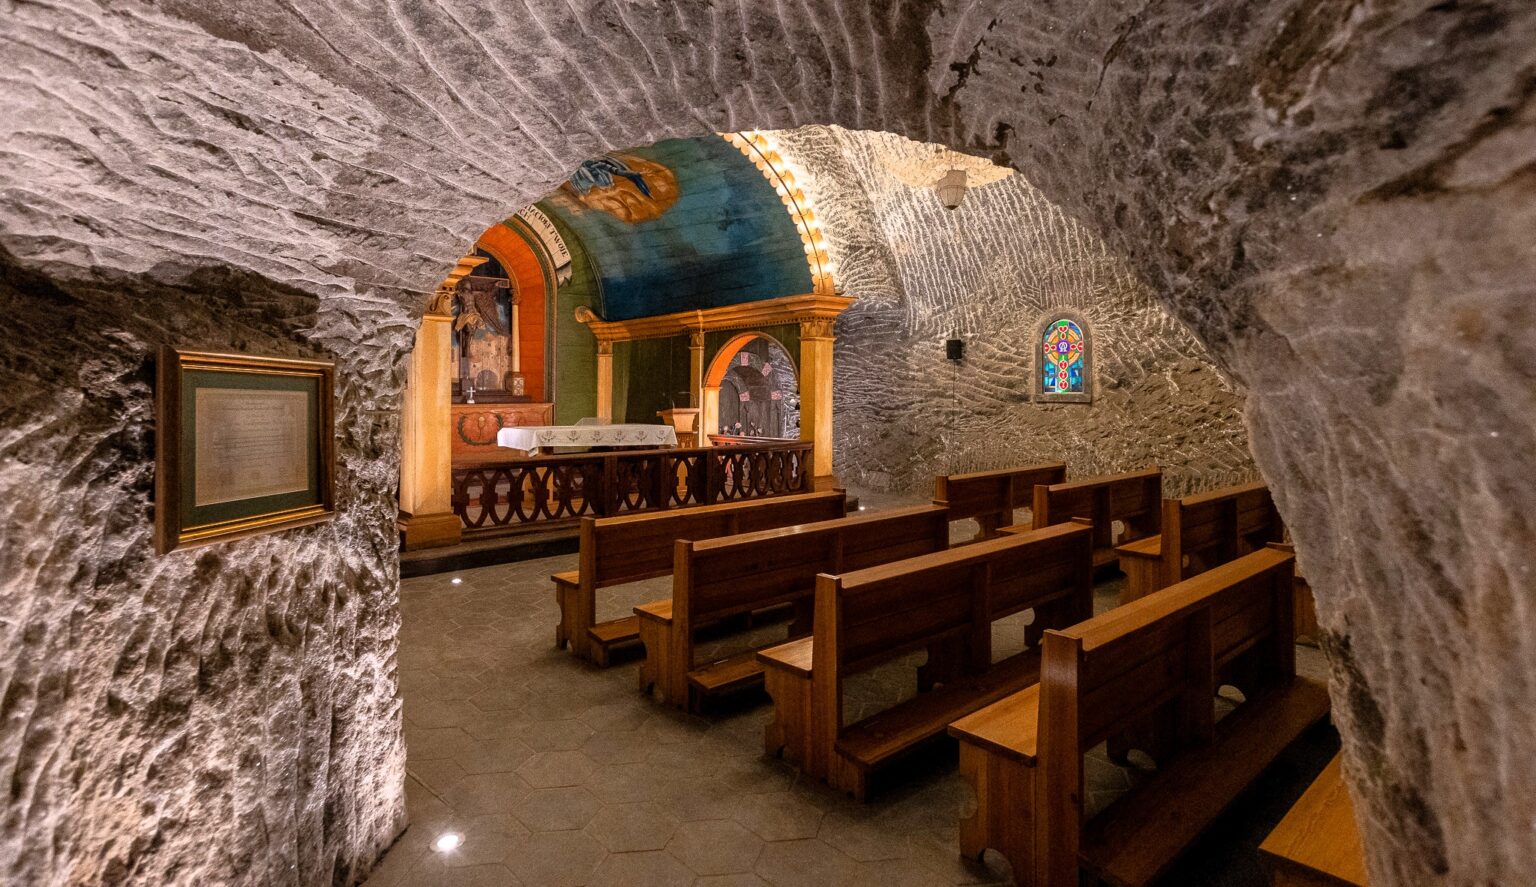 Discover the remarkable St Kinga's Chapel, nestled 101 meters underground in the Wieliczka Salt Mine near Krakow, Poland. This Easter, experience a special service in this awe-inspiring chamber, adorned with intricate salt sculptures and crystal chandeliers.